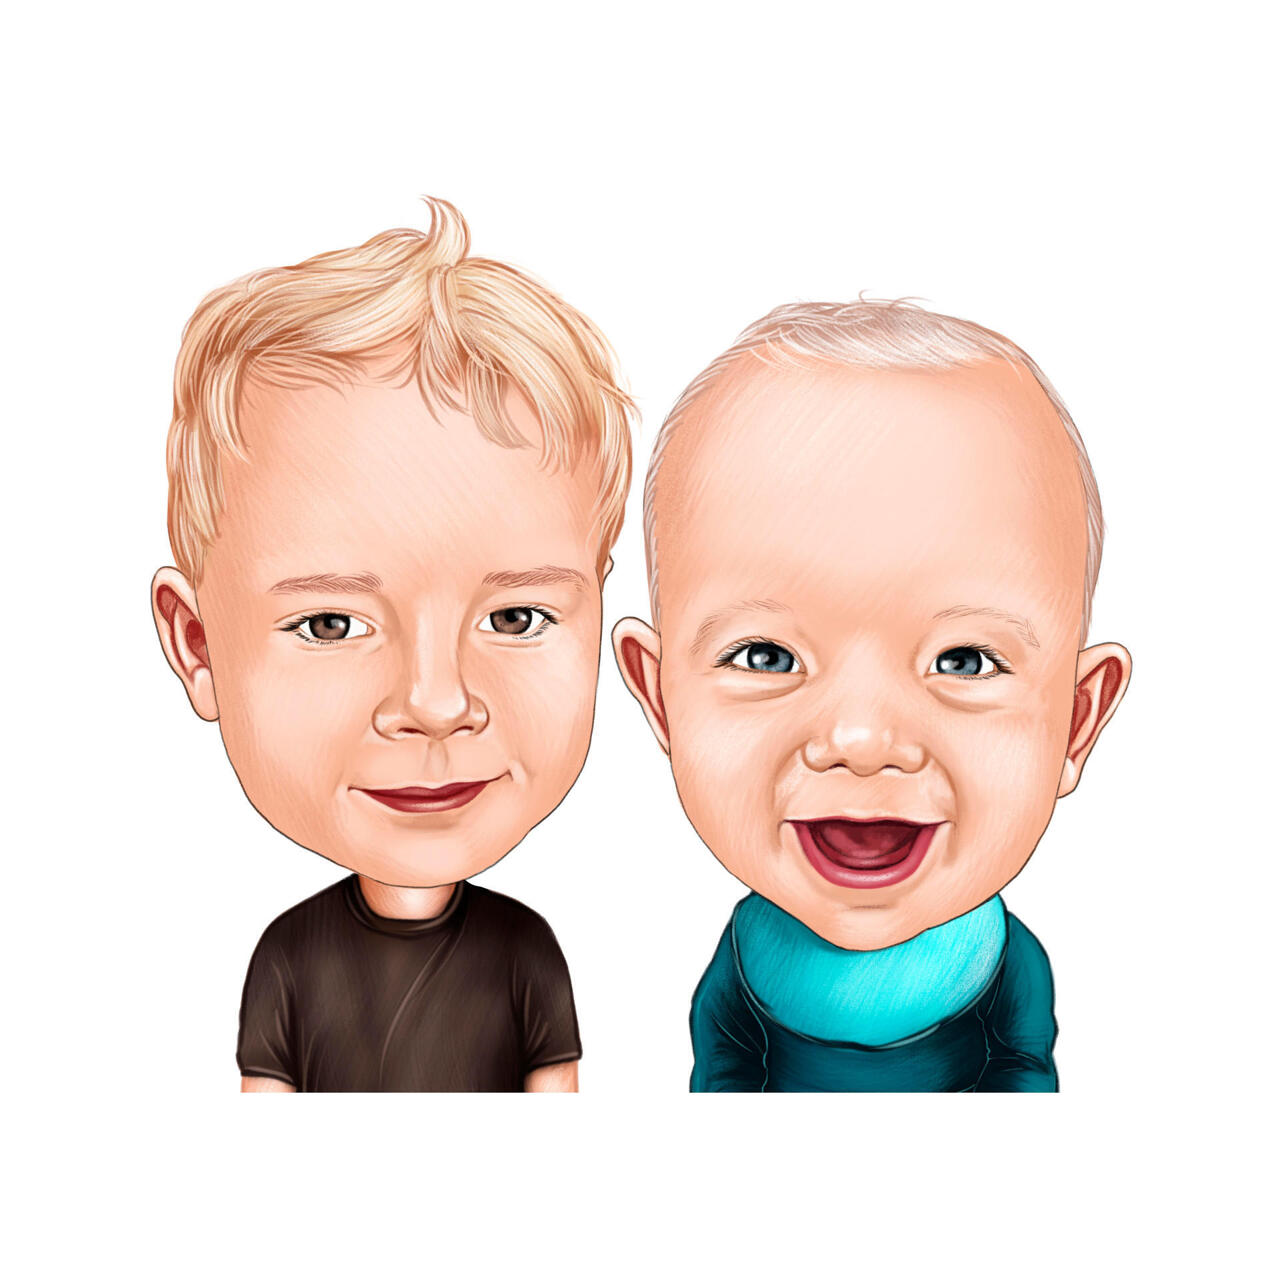 Dad's carbon copy - Father's day gift caricature